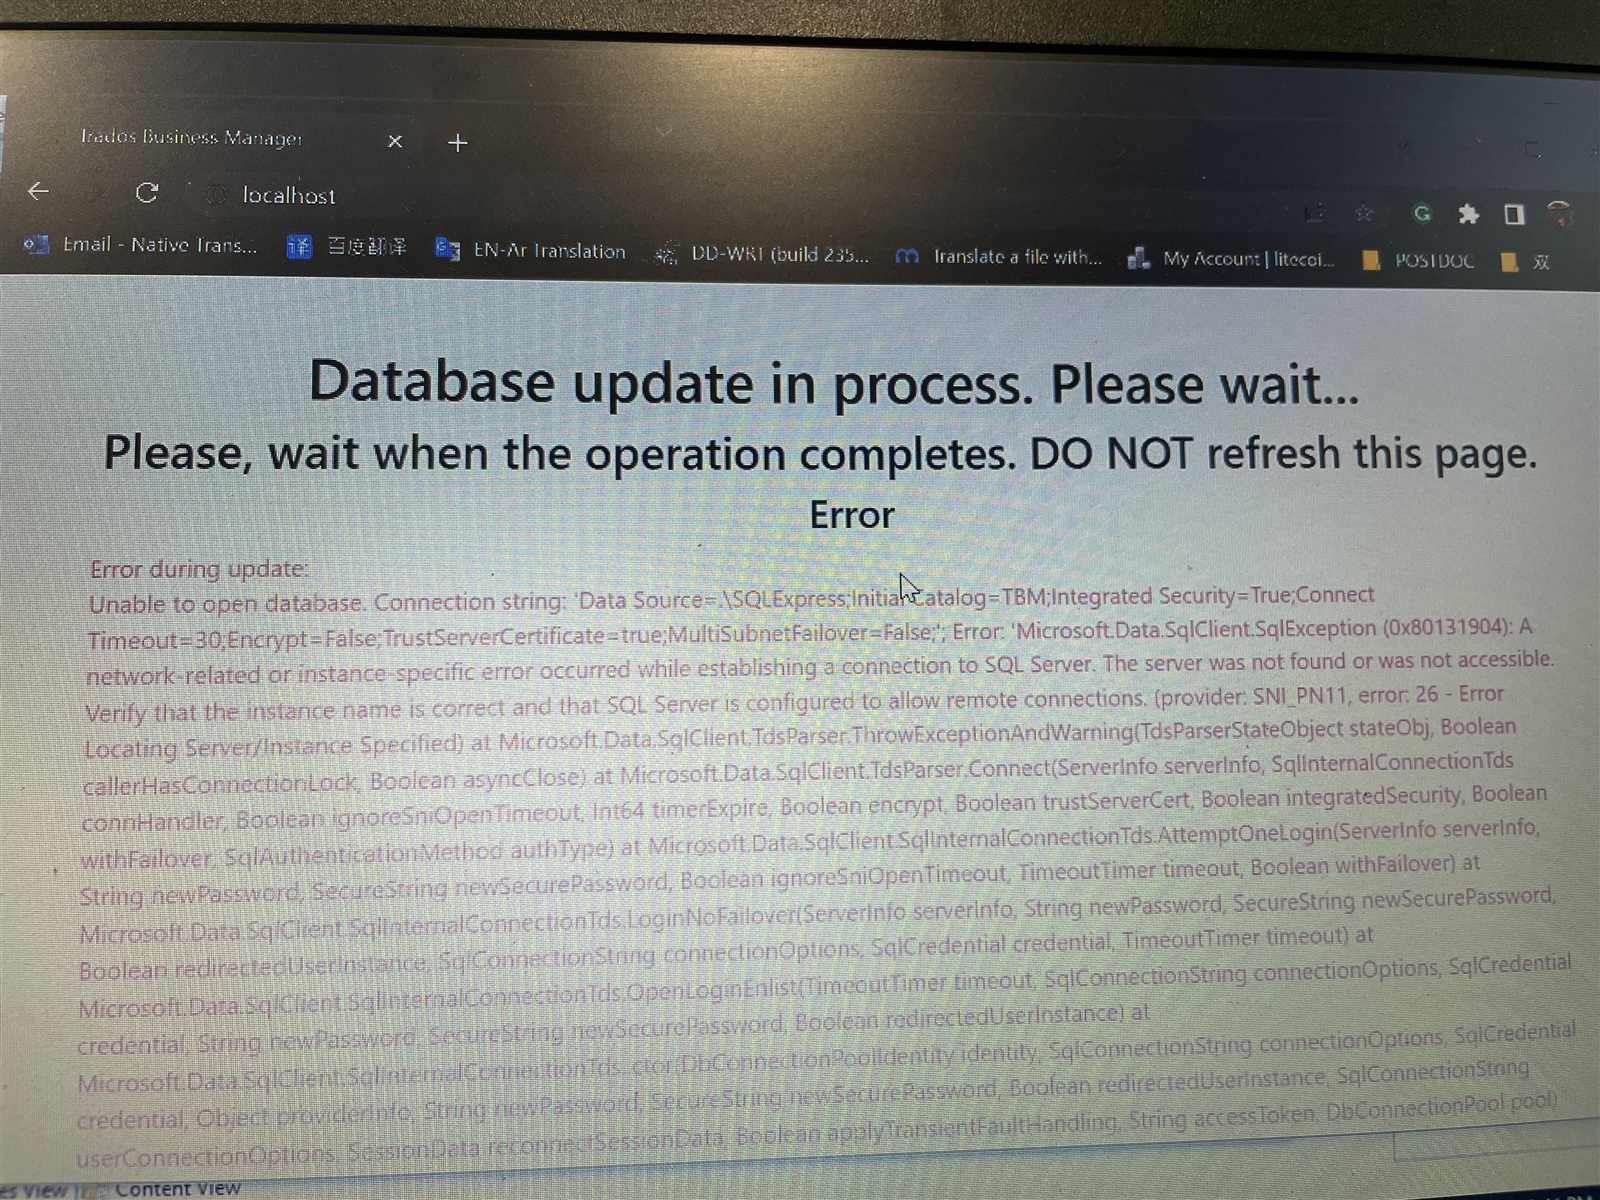 Error message on Trados Business Manager stating 'Database update in process. Please wait... Error during update: Unable to open database. Connection string: Data Source=...'